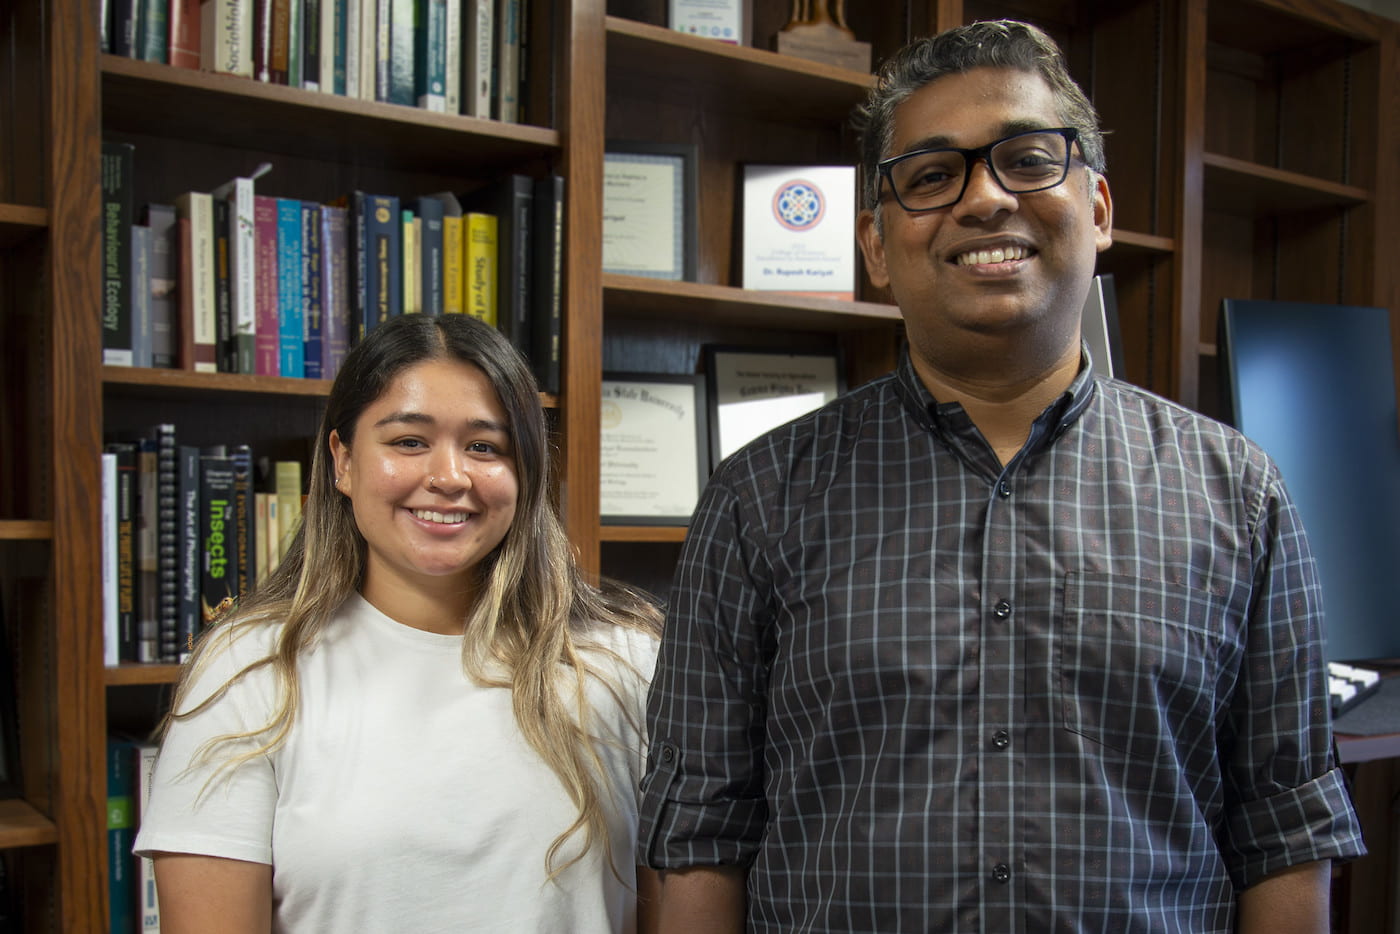 NEW OPPORTUNITIES — Evelyn Madrigal, left, stands with her adviser Rupesh Kariyat, associate professor of crop entomology for the Arkansas Agricultural Experiment Station.